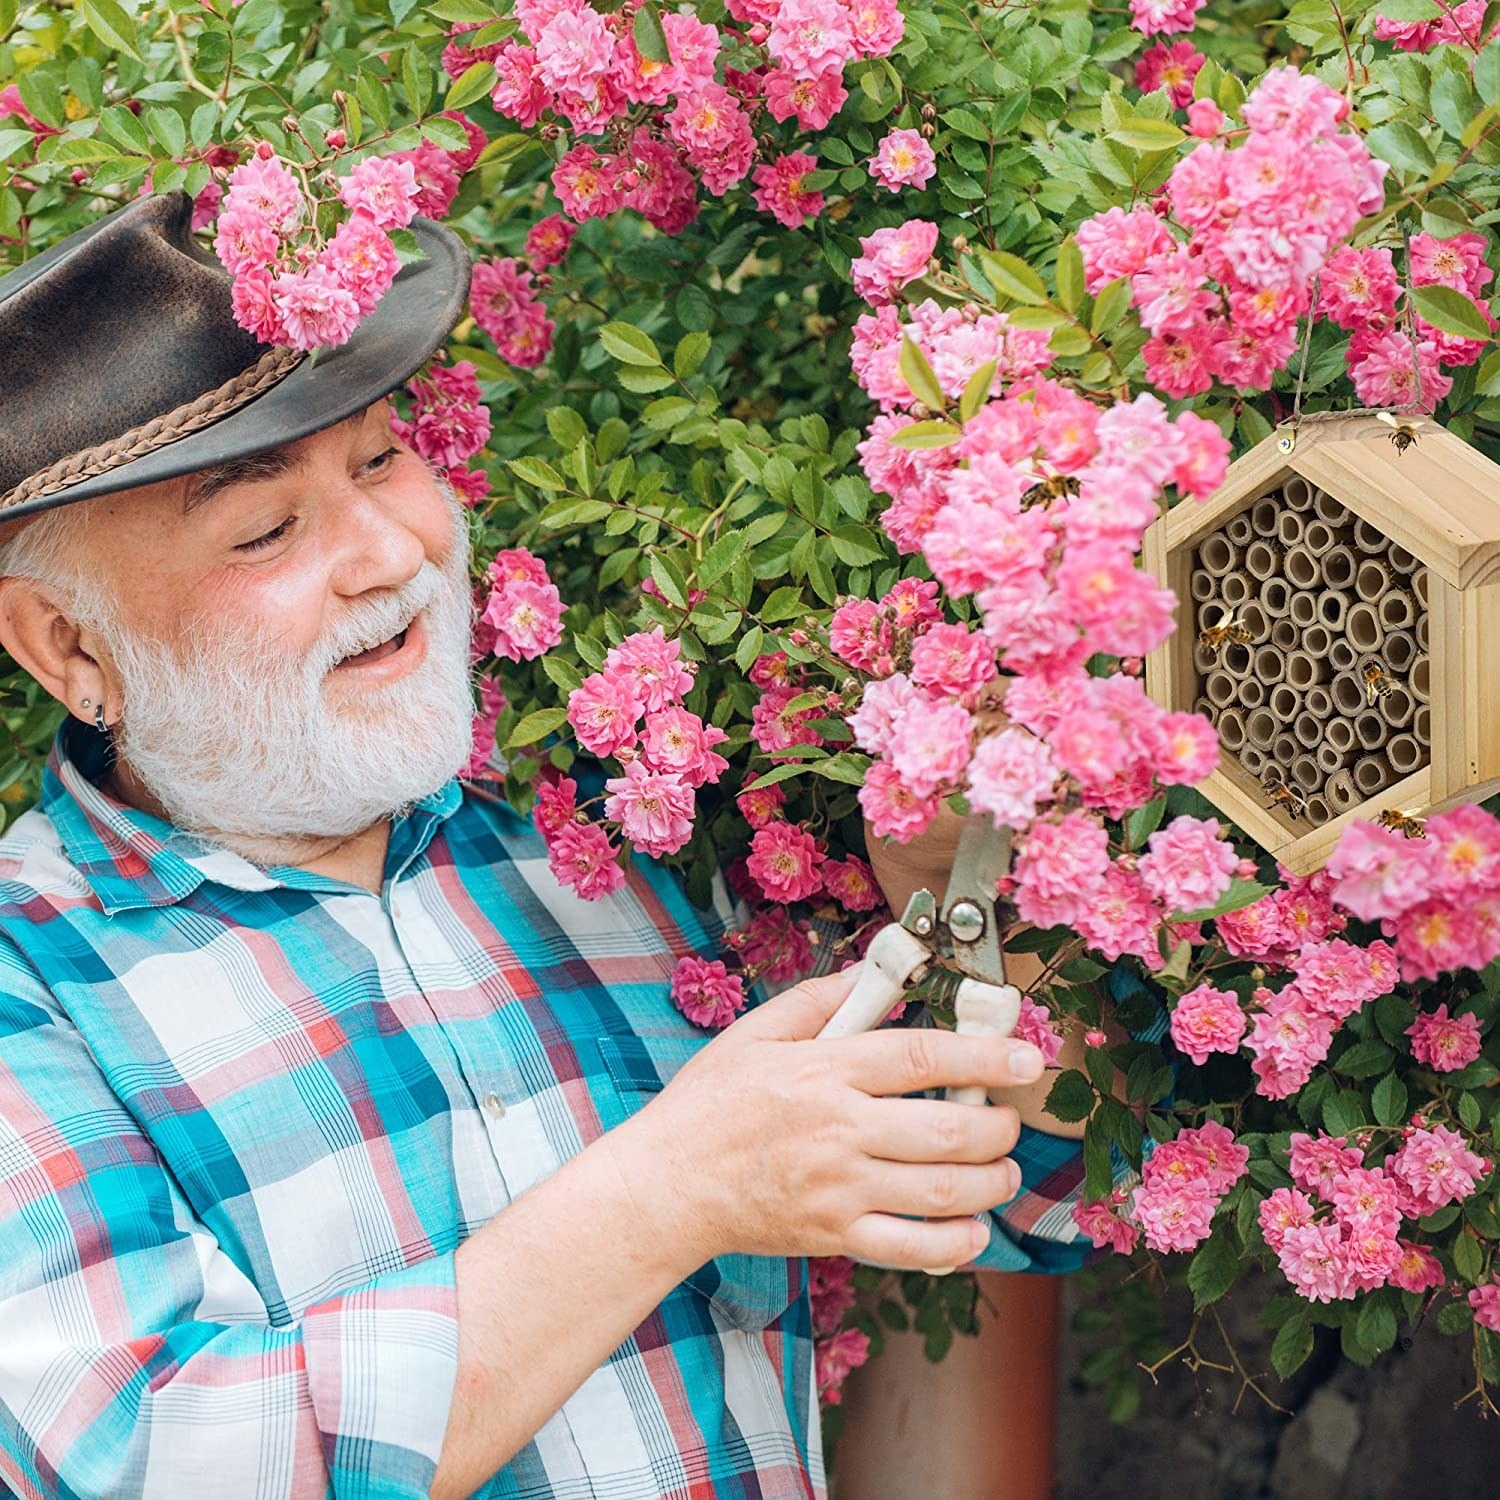 A man gardening next to the bee hive